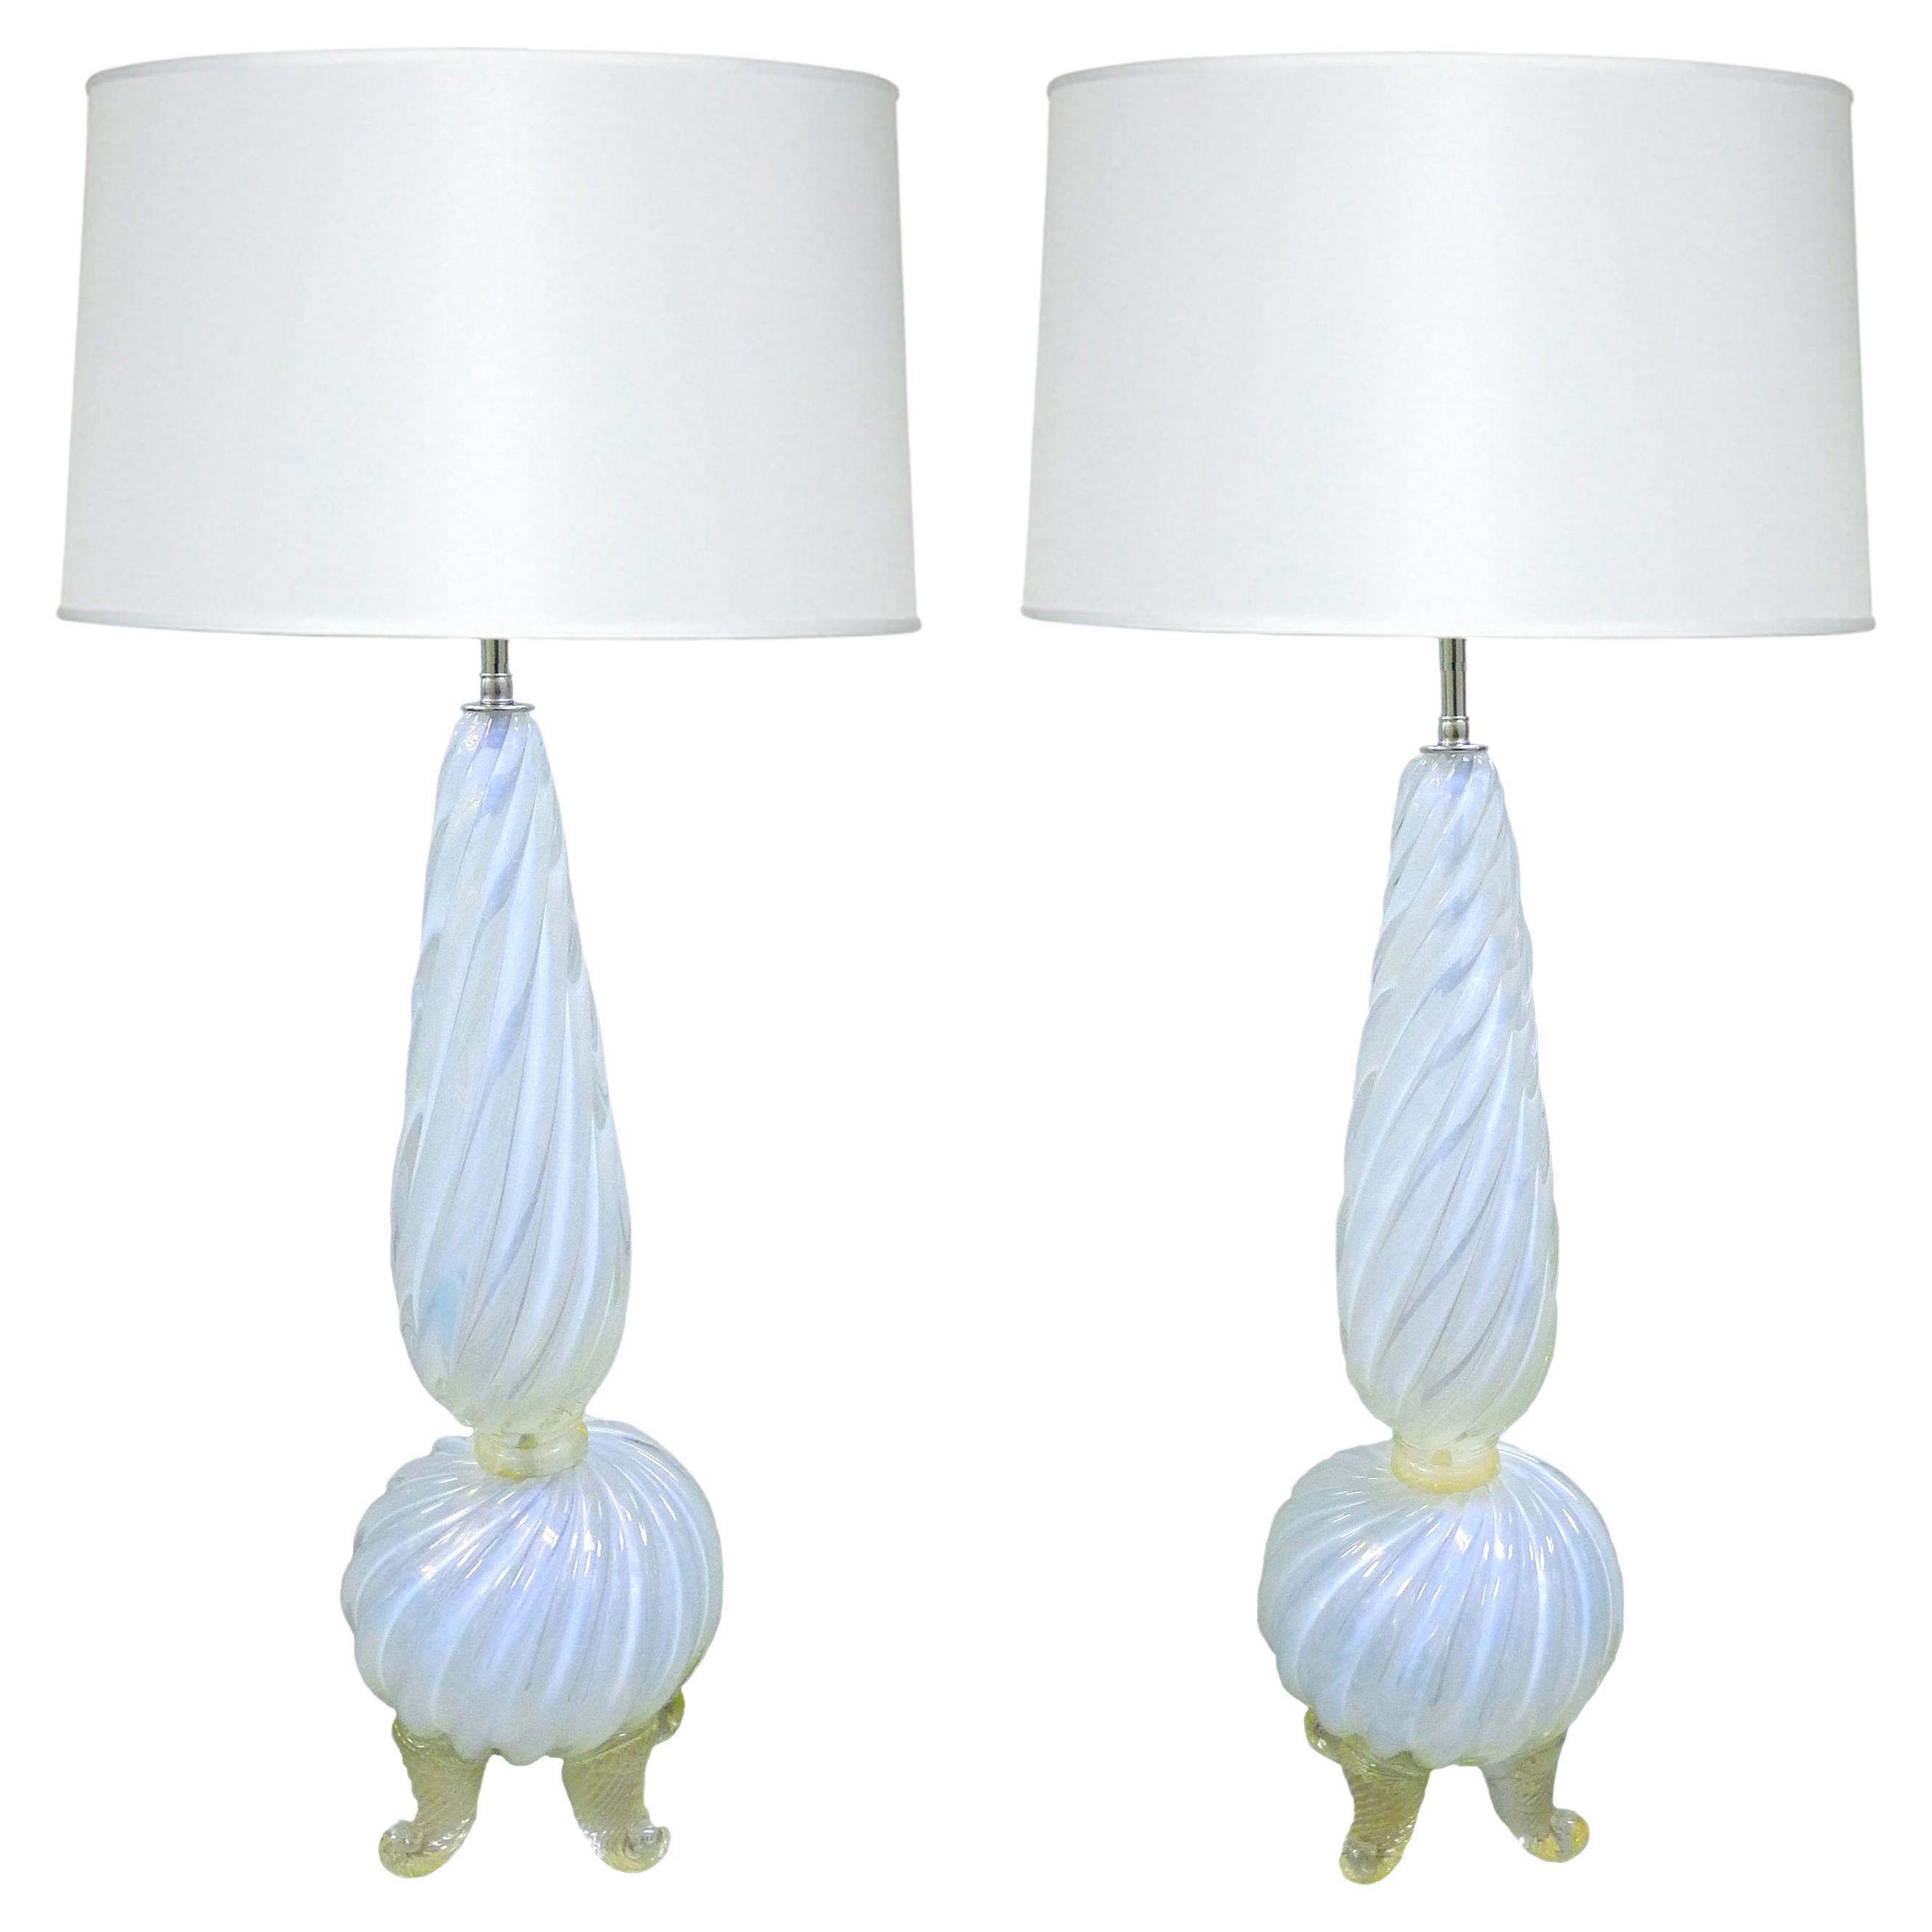  Vintage Murano Gallery Table Lamps